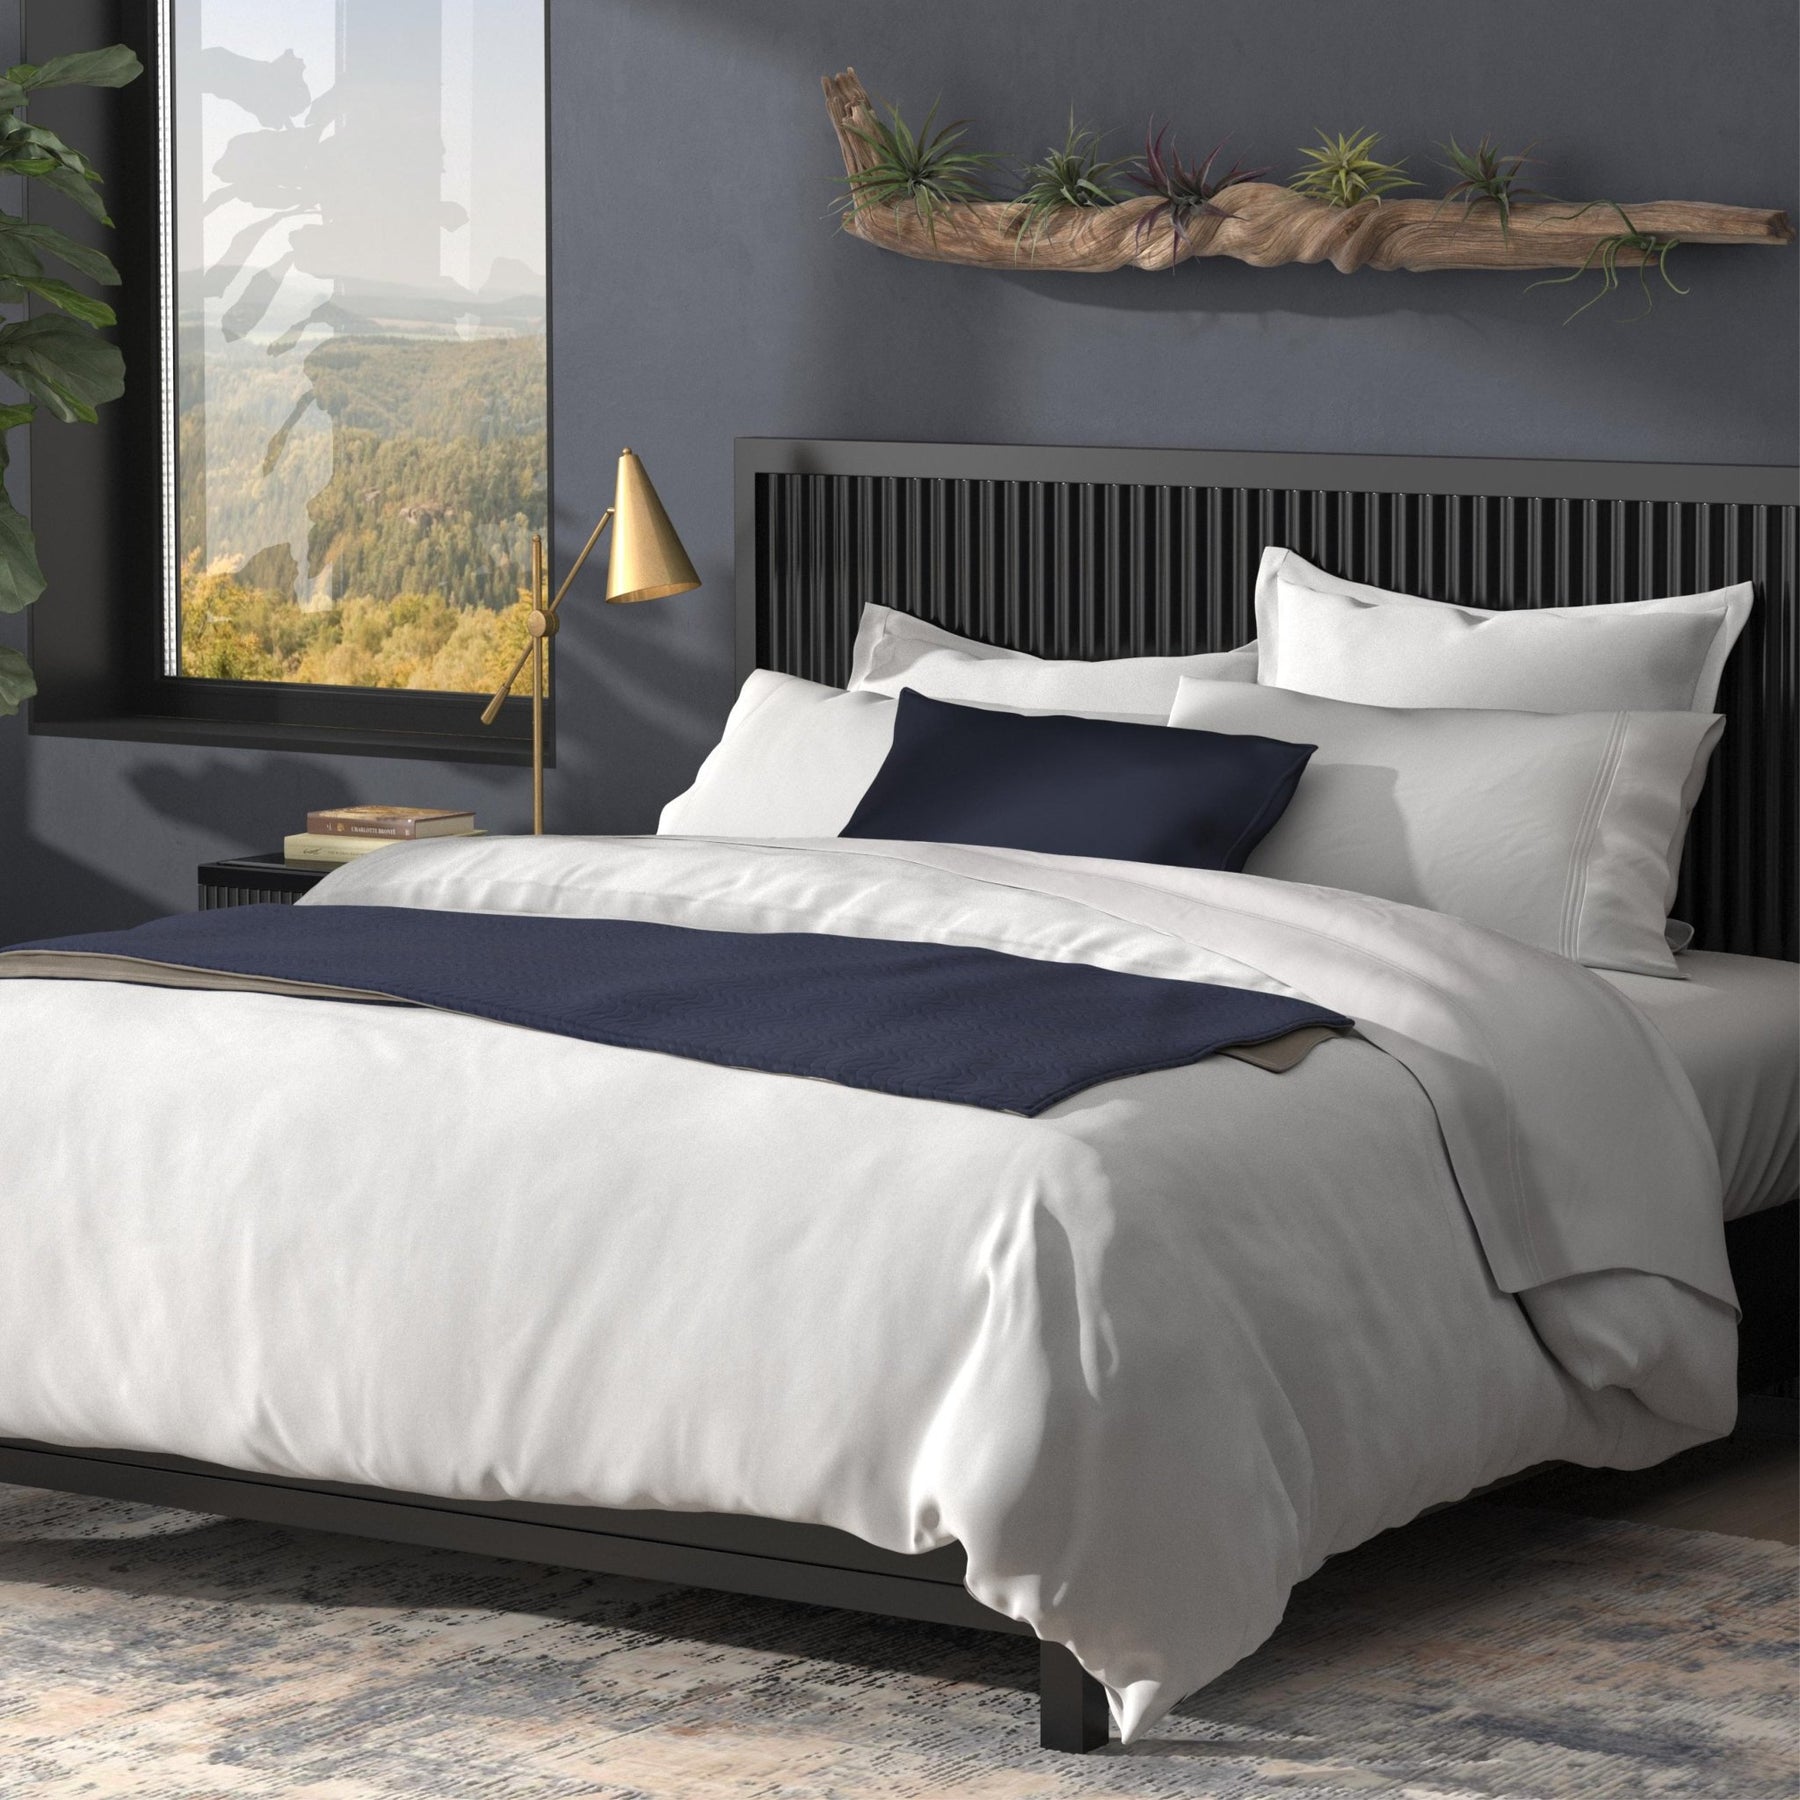 Image of a neatly made bed with white sheets and navy blue accents with the White Duvet Cover + Cooling on top